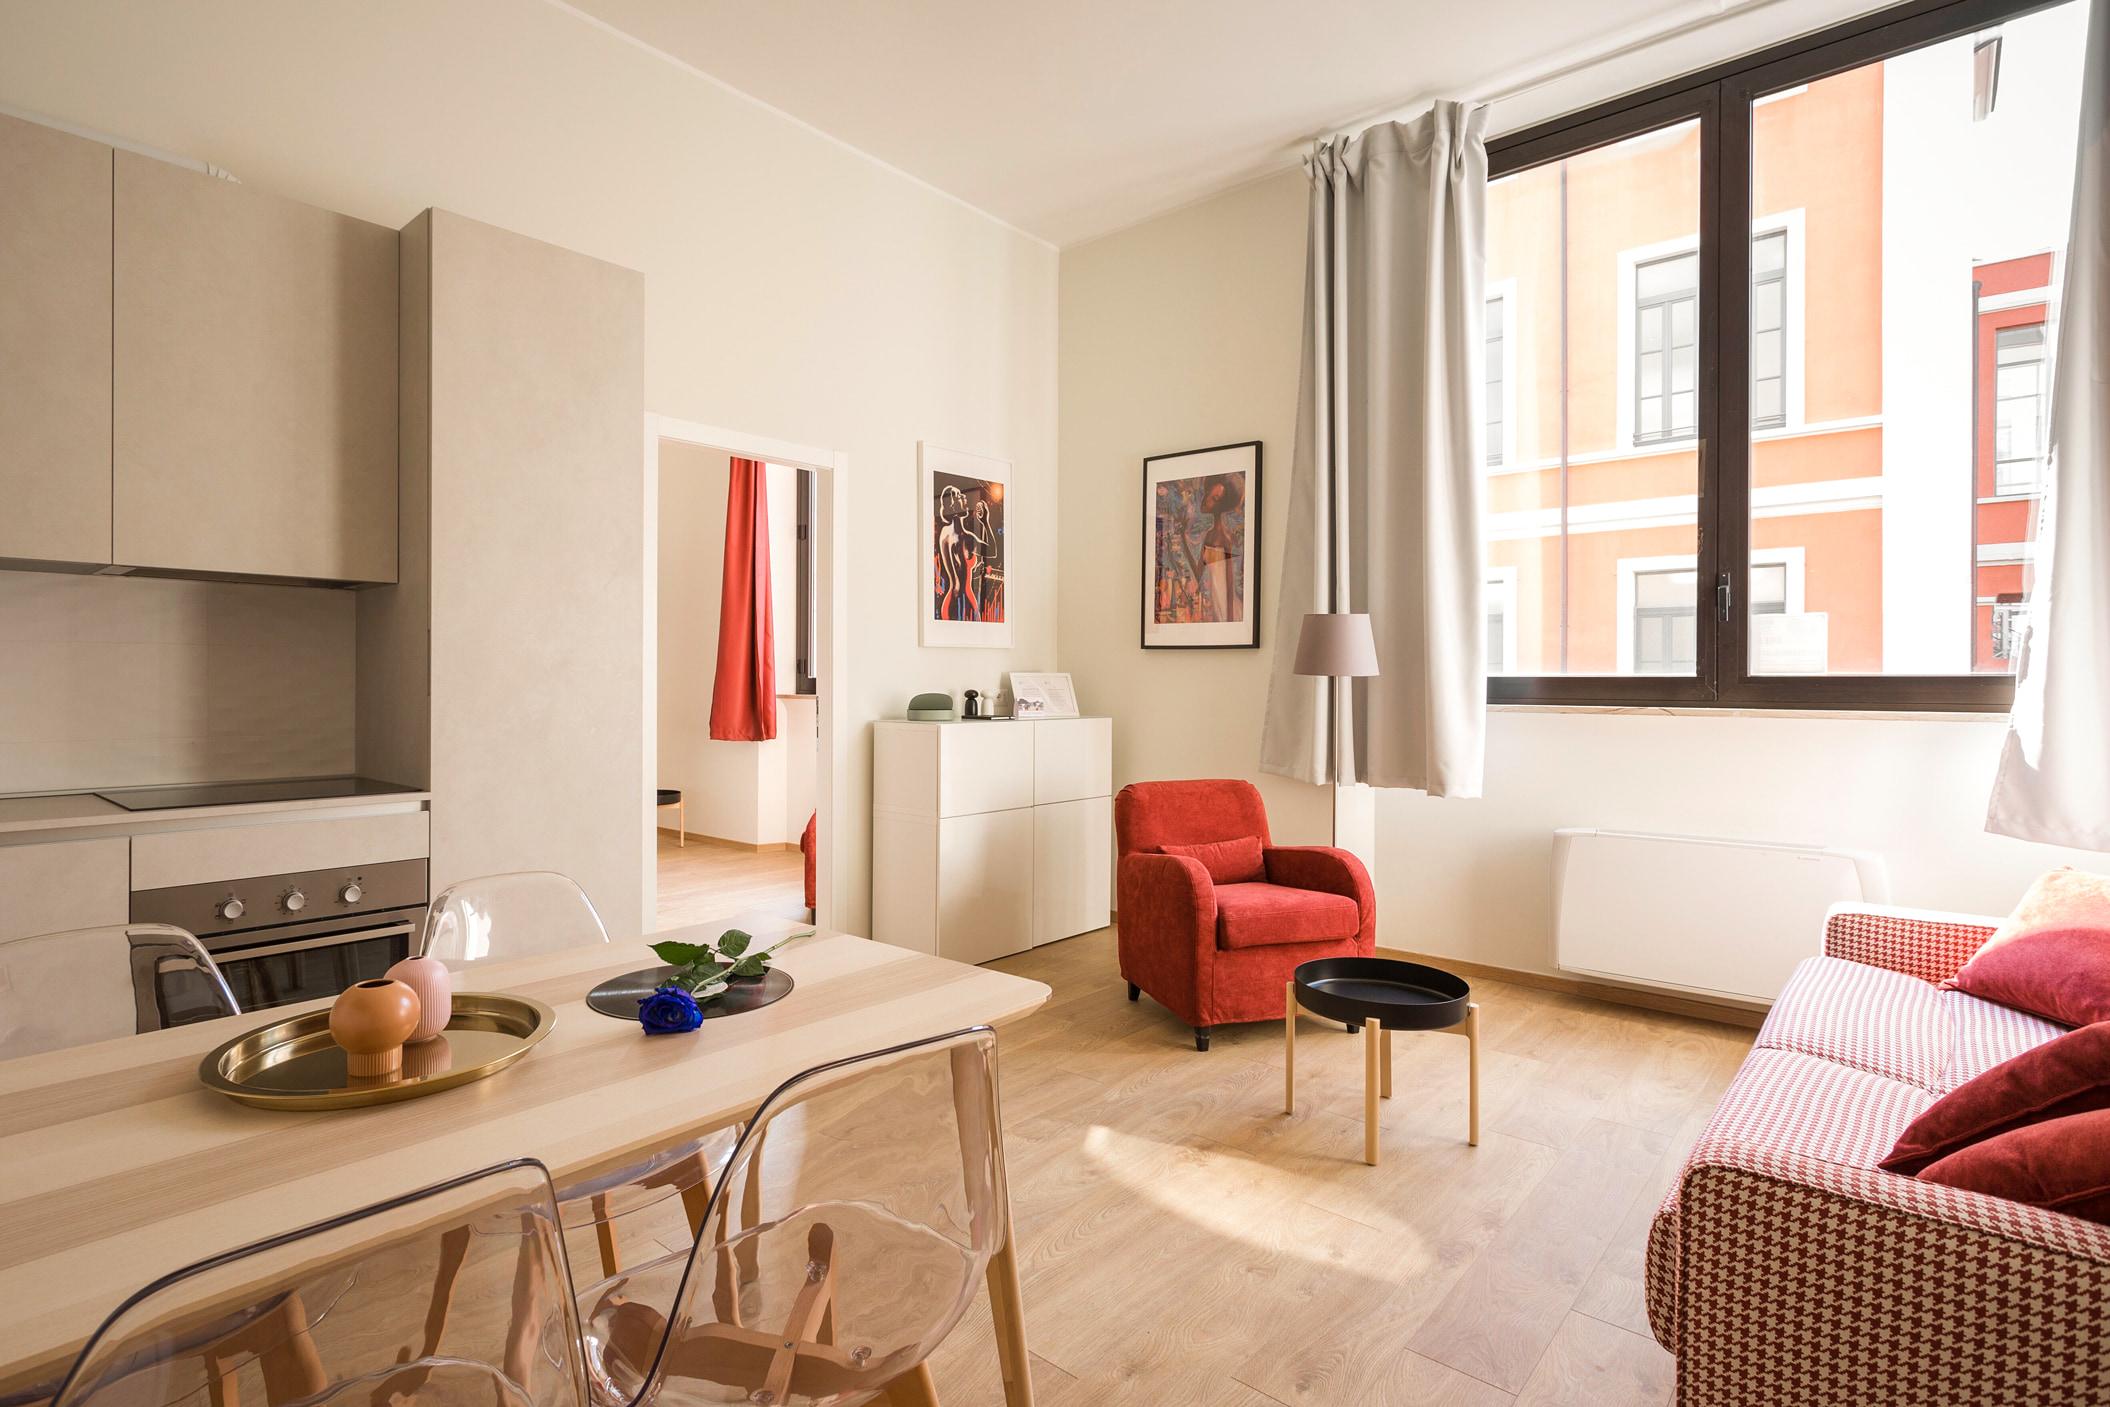 SmartApartment: A modern solution for efficient management of rental apartments